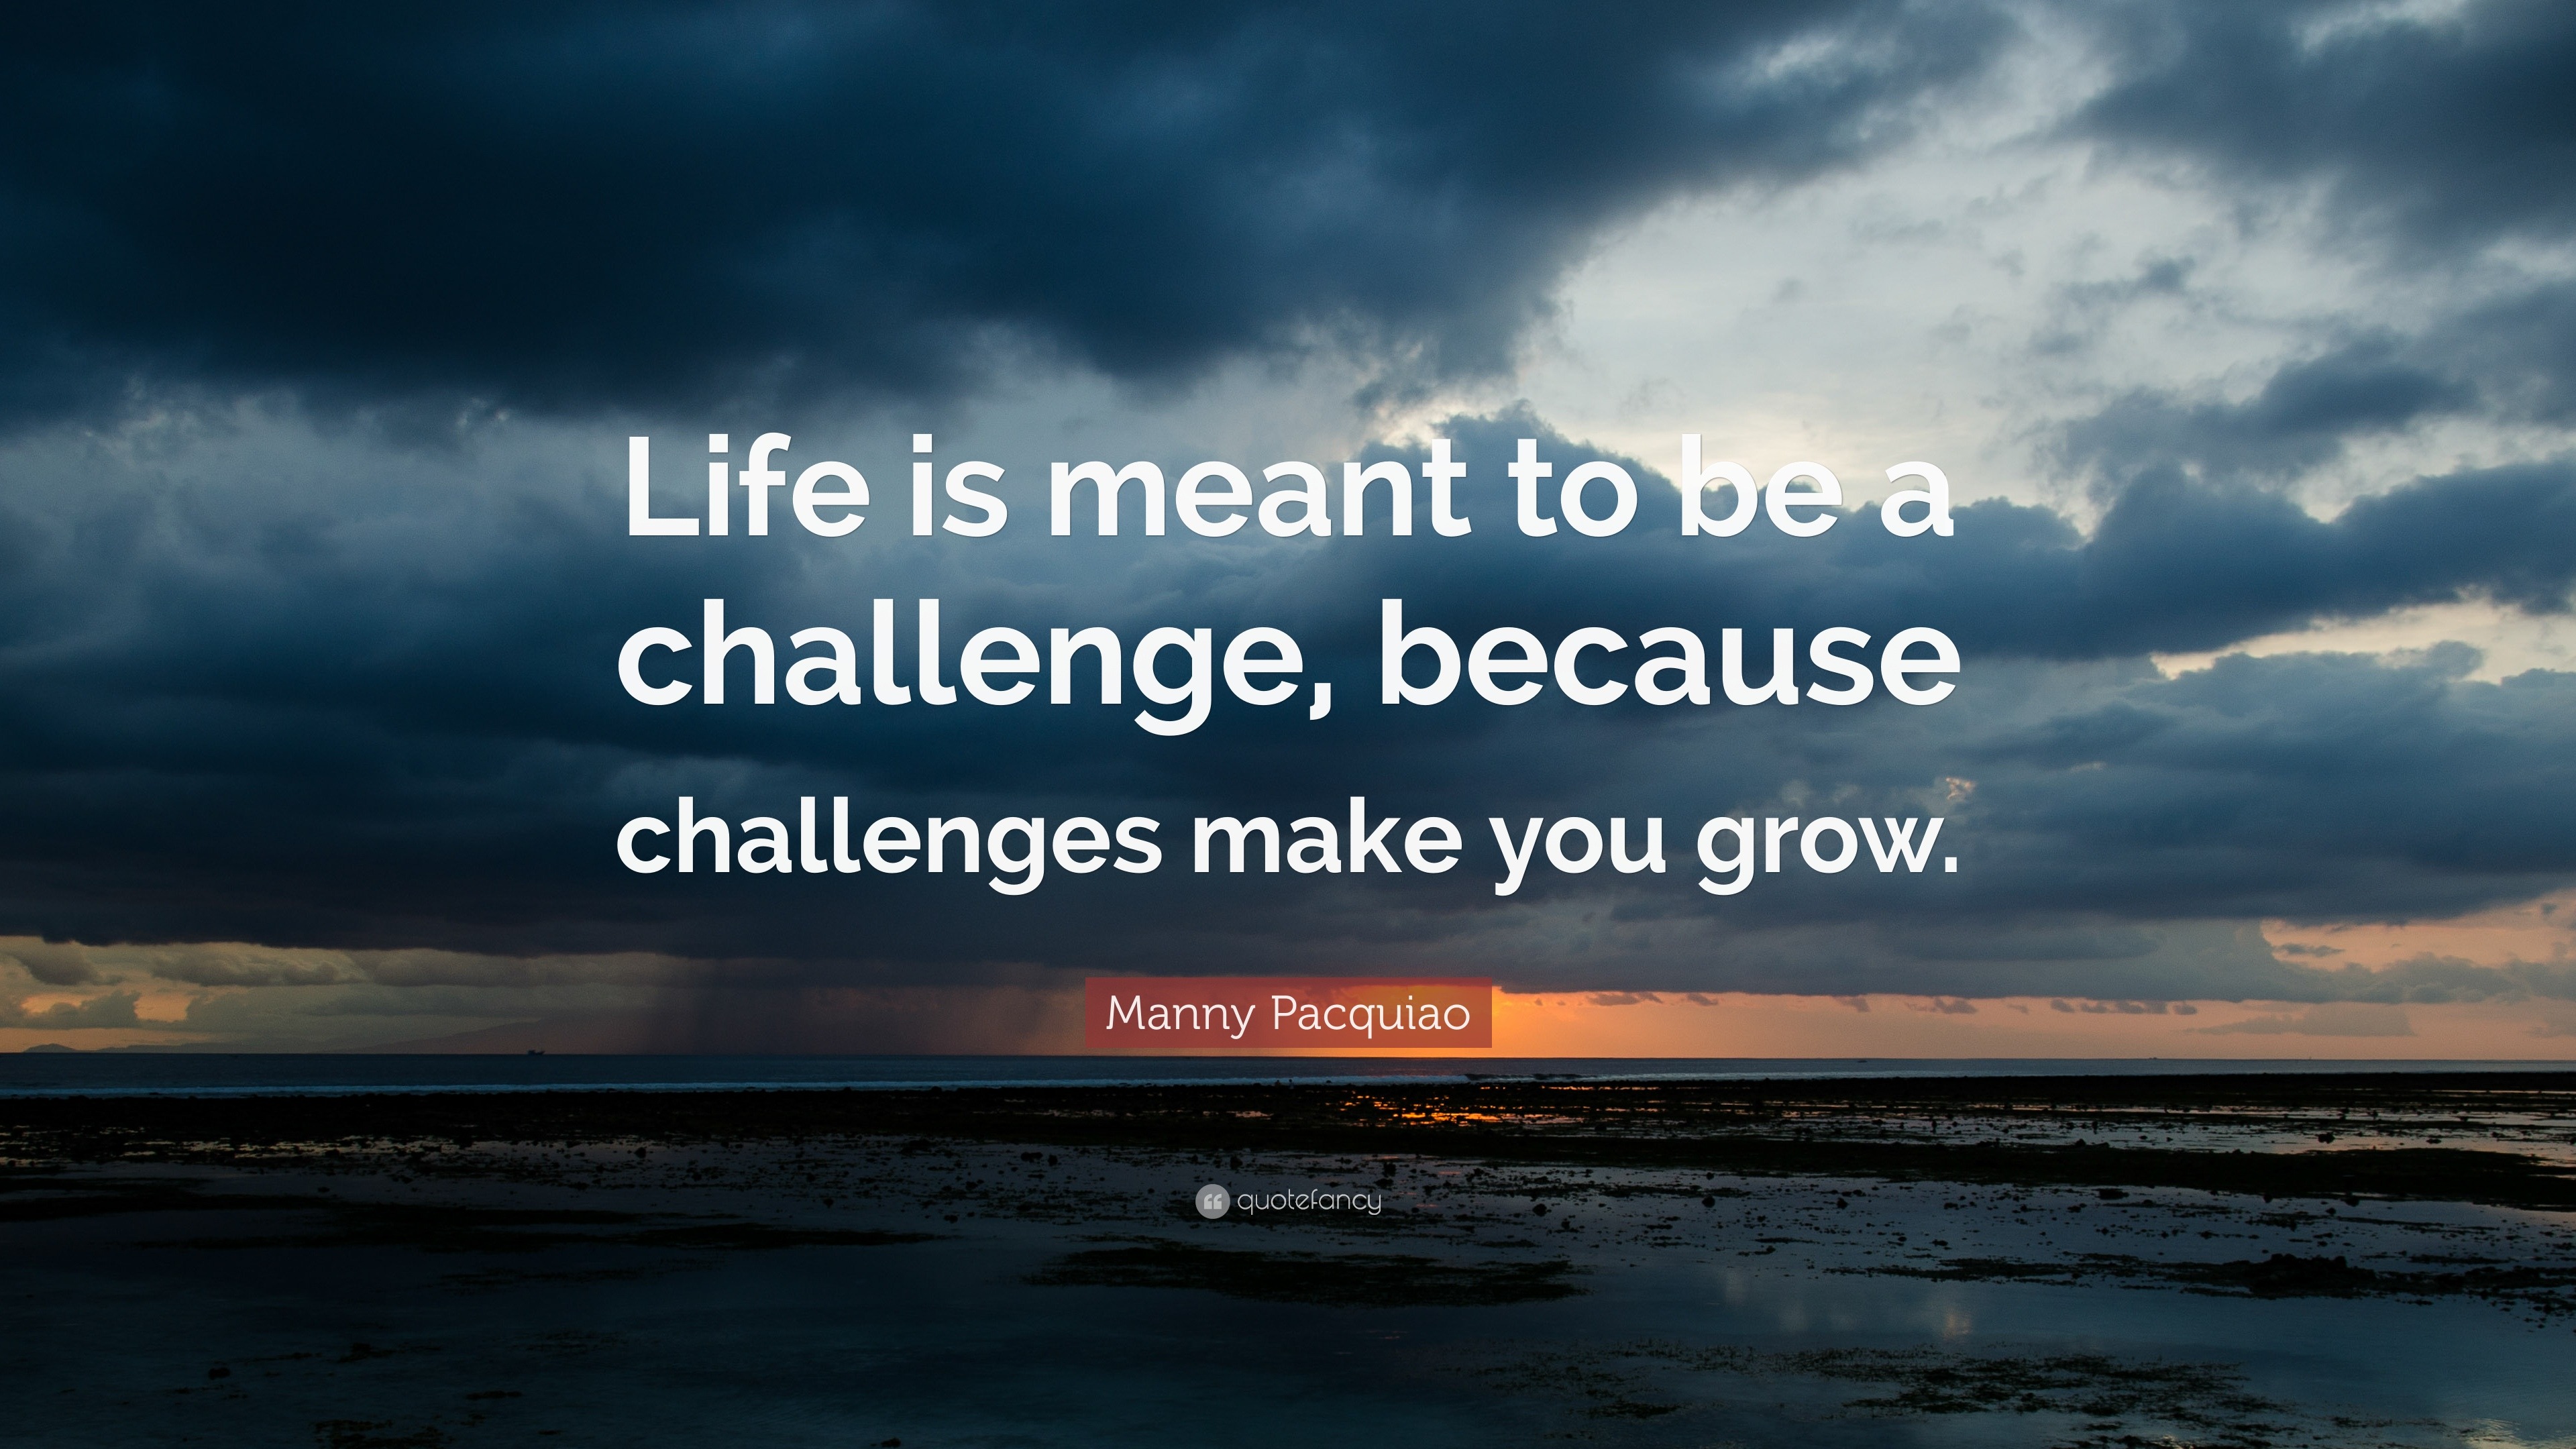 Manny Pacquiao Quote: “Life is meant to be a challenge, because